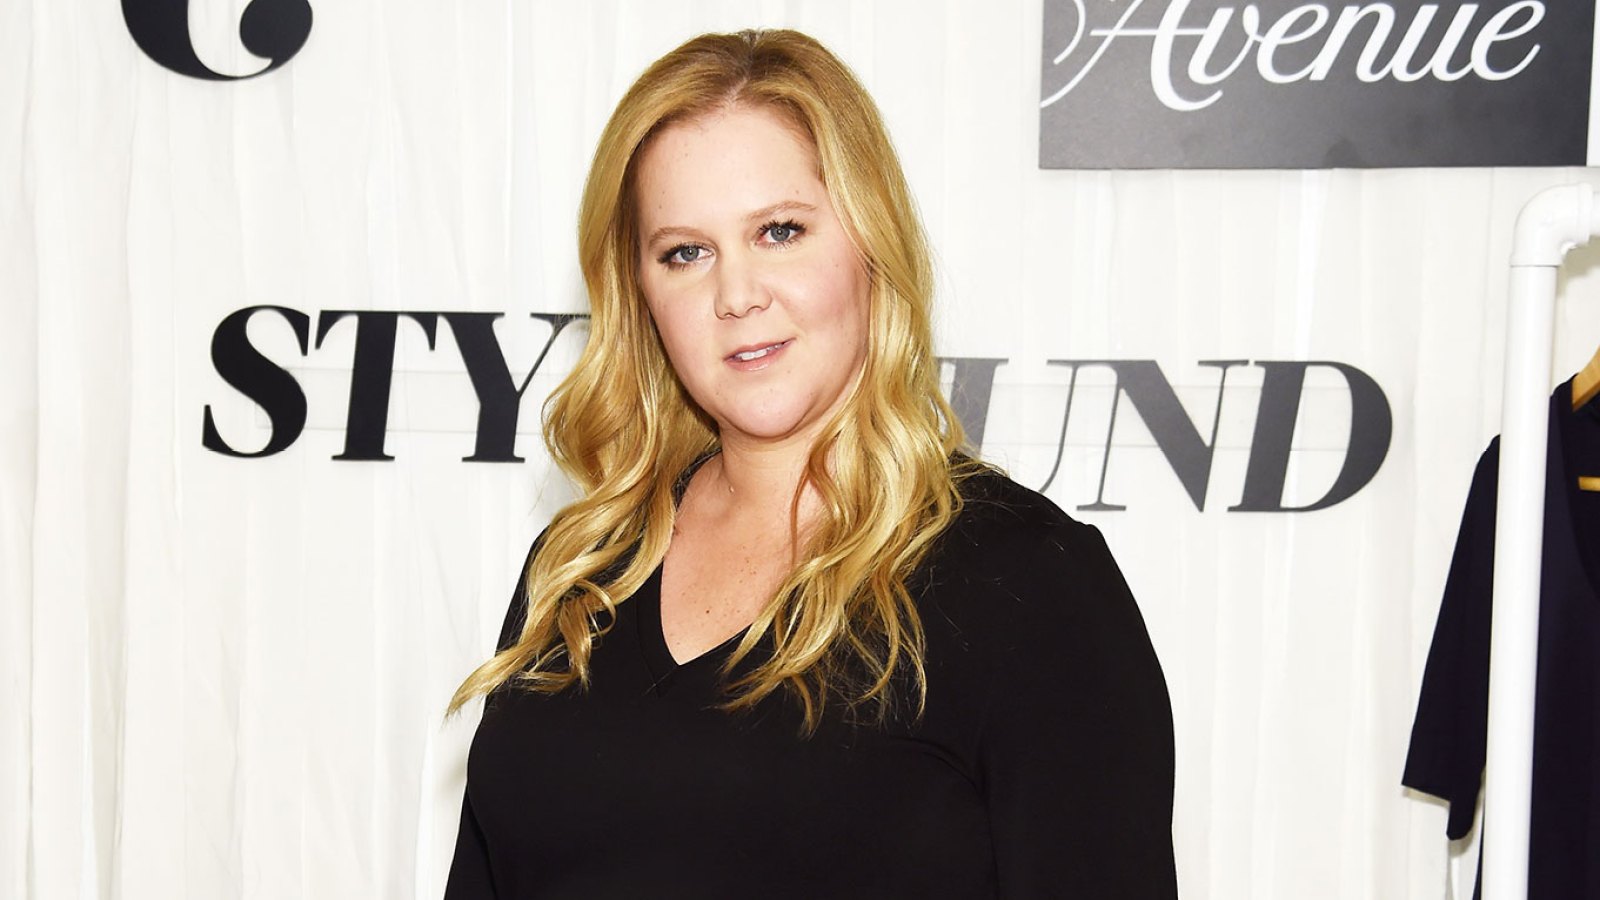 Pregnant Amy Schumer Models Bathing Suit That 'Fits Like a Small Glove'